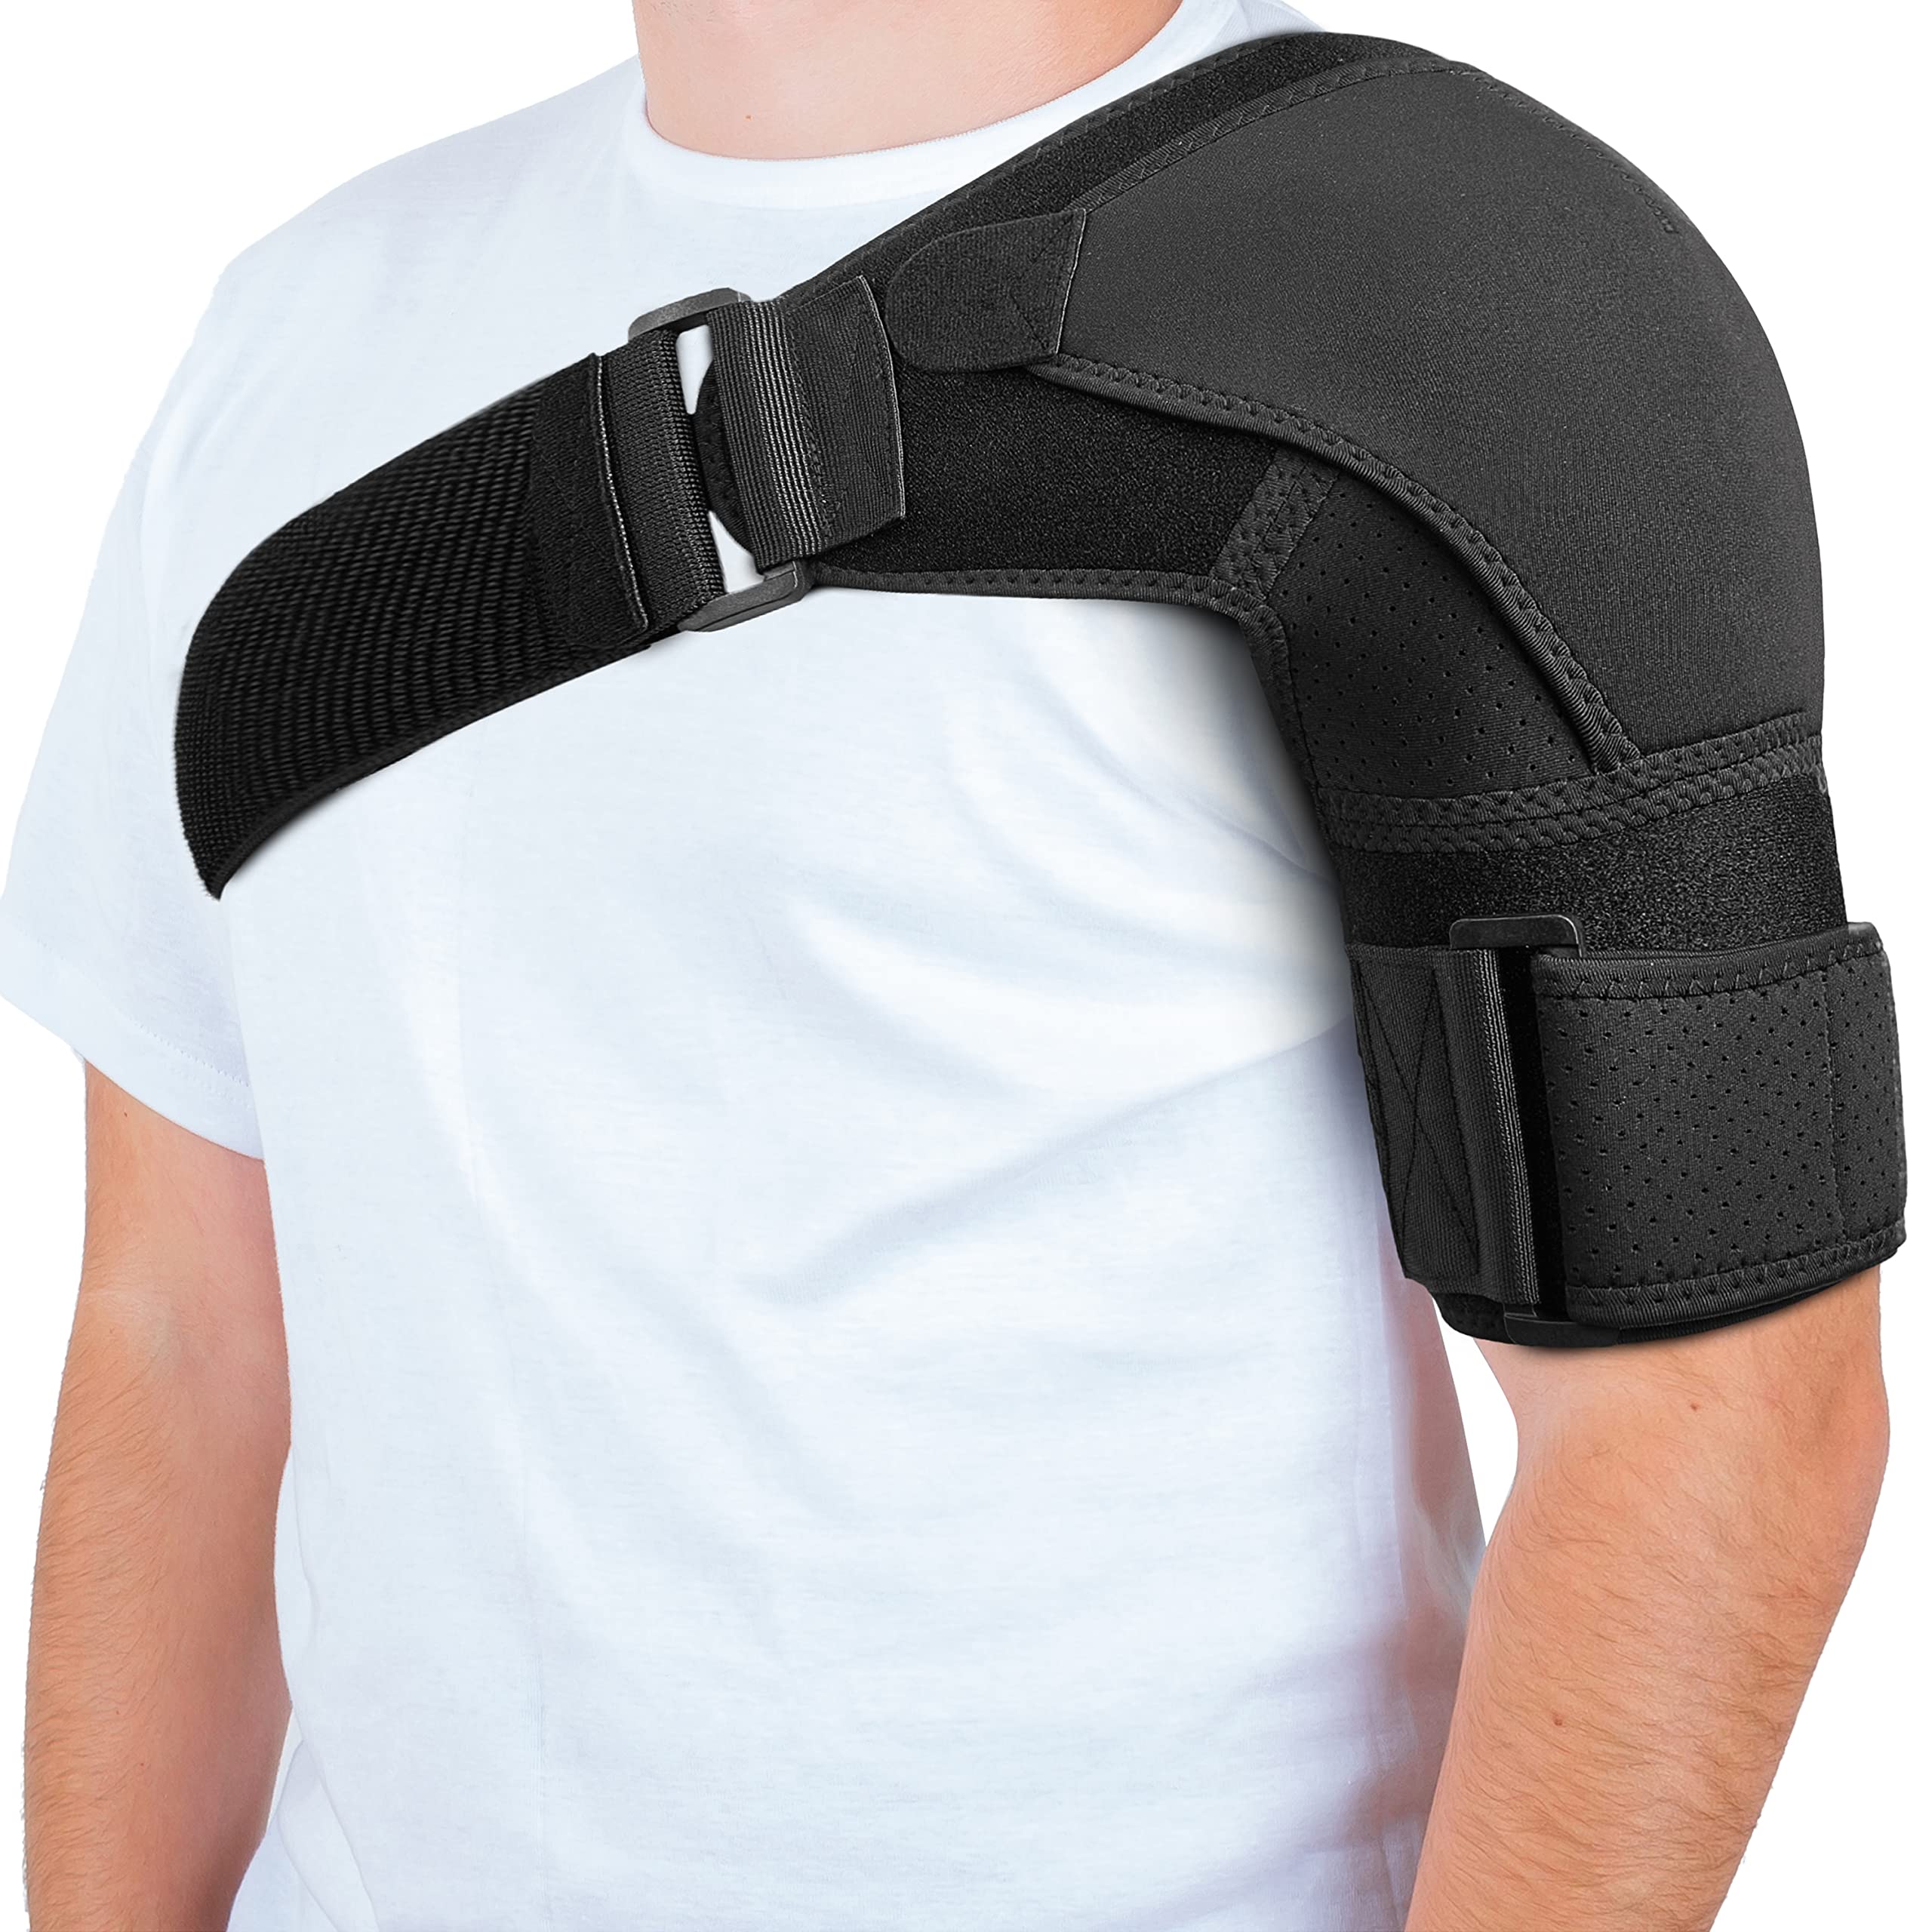 POAGL Shoulder Brace for Men and Women Both Left and Right Arm